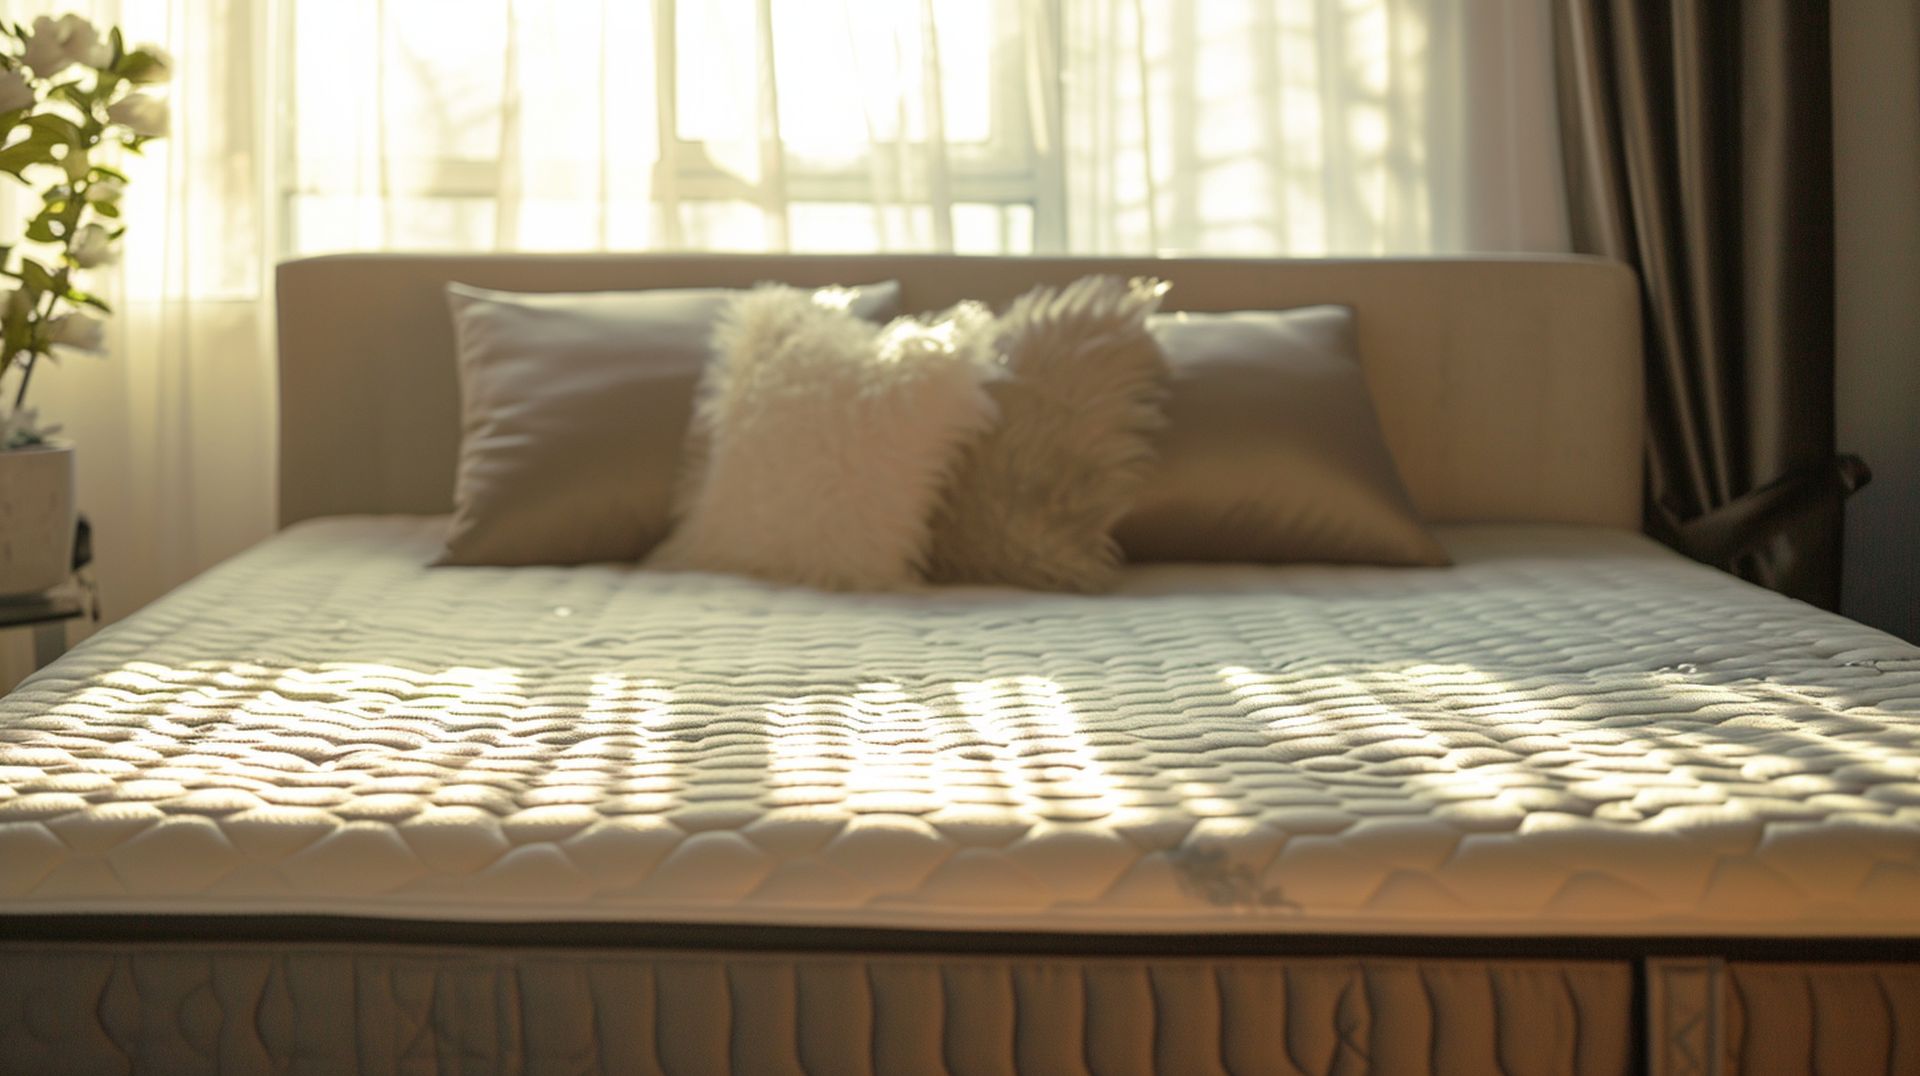 If you're looking for a new bed, mattress stores in Lakewood offer the best customer and delivery service, financing, and warranties in New Jersey